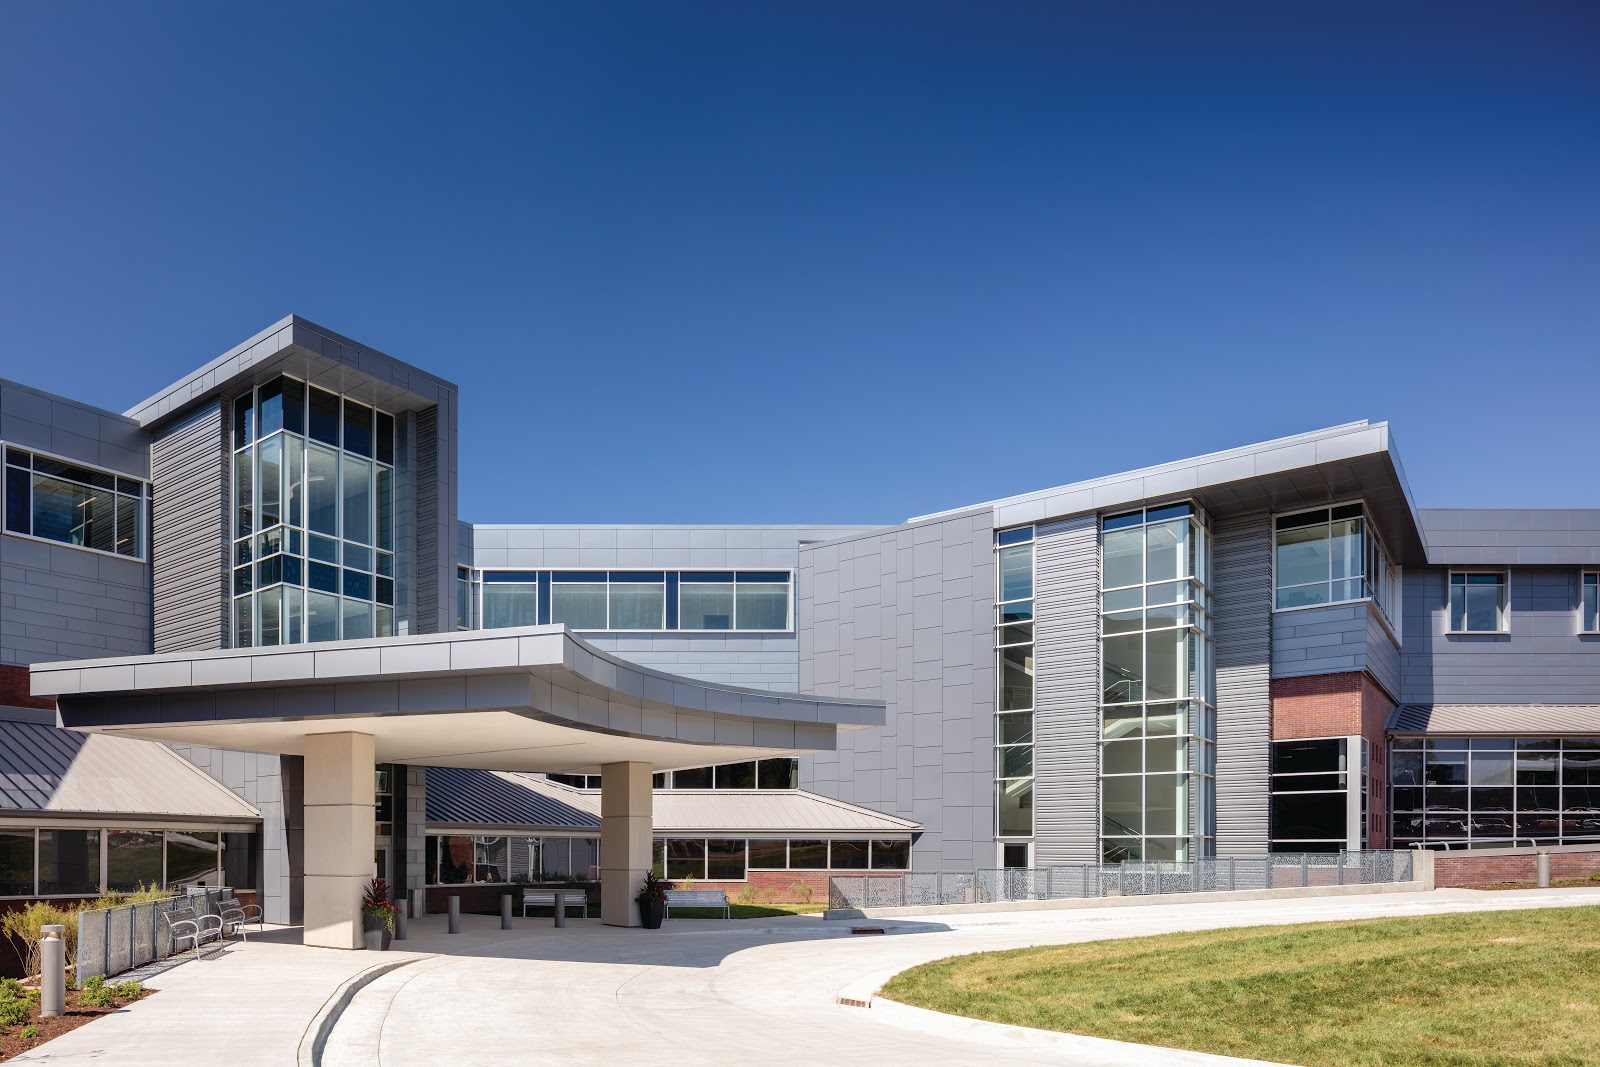 New Connections - Broadlawns Medical Center